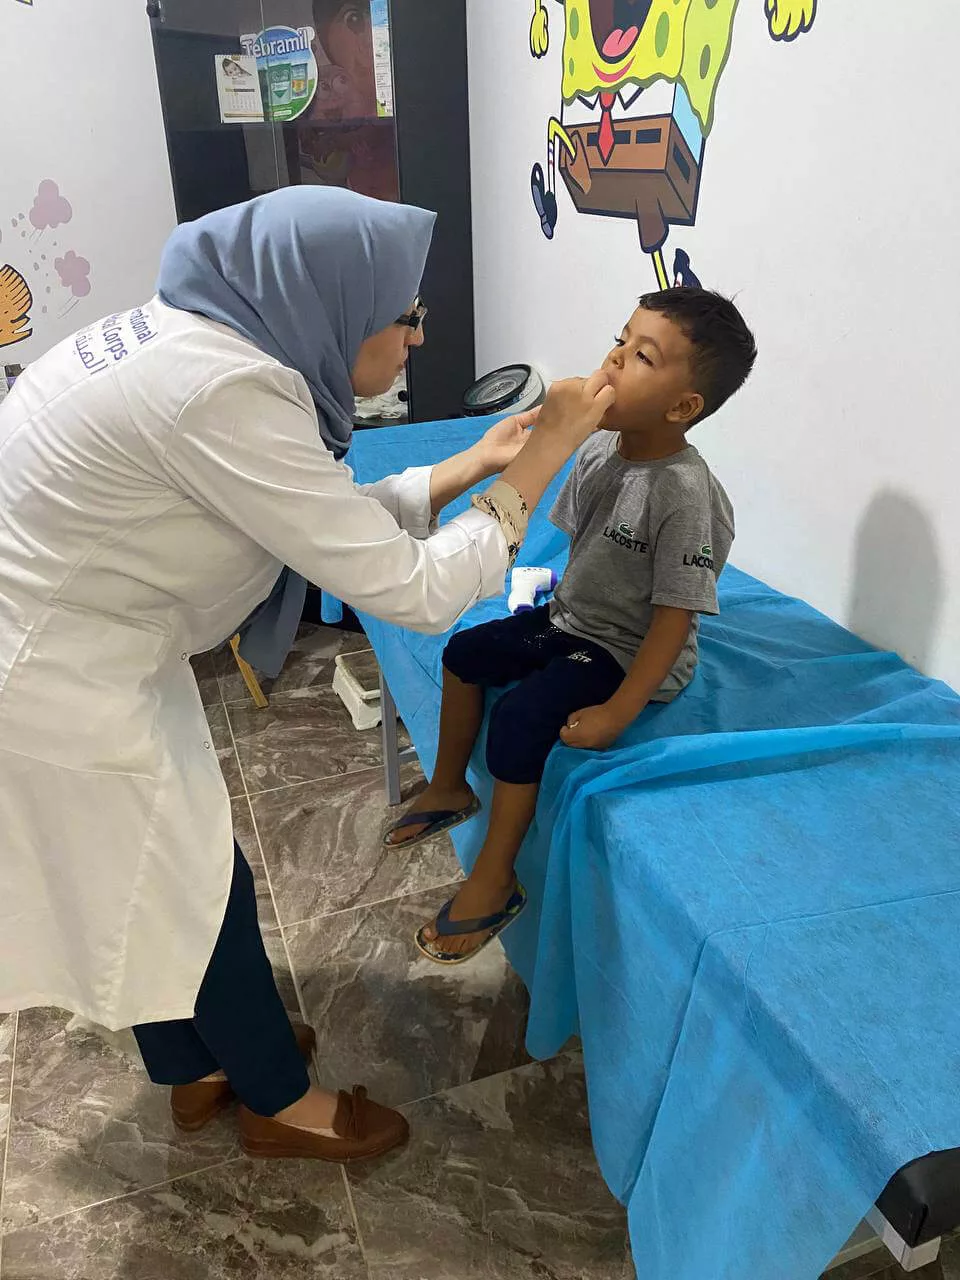 Staff members conduct health consultations and provide supplies at a primary healthcare center in Derna, Libya.